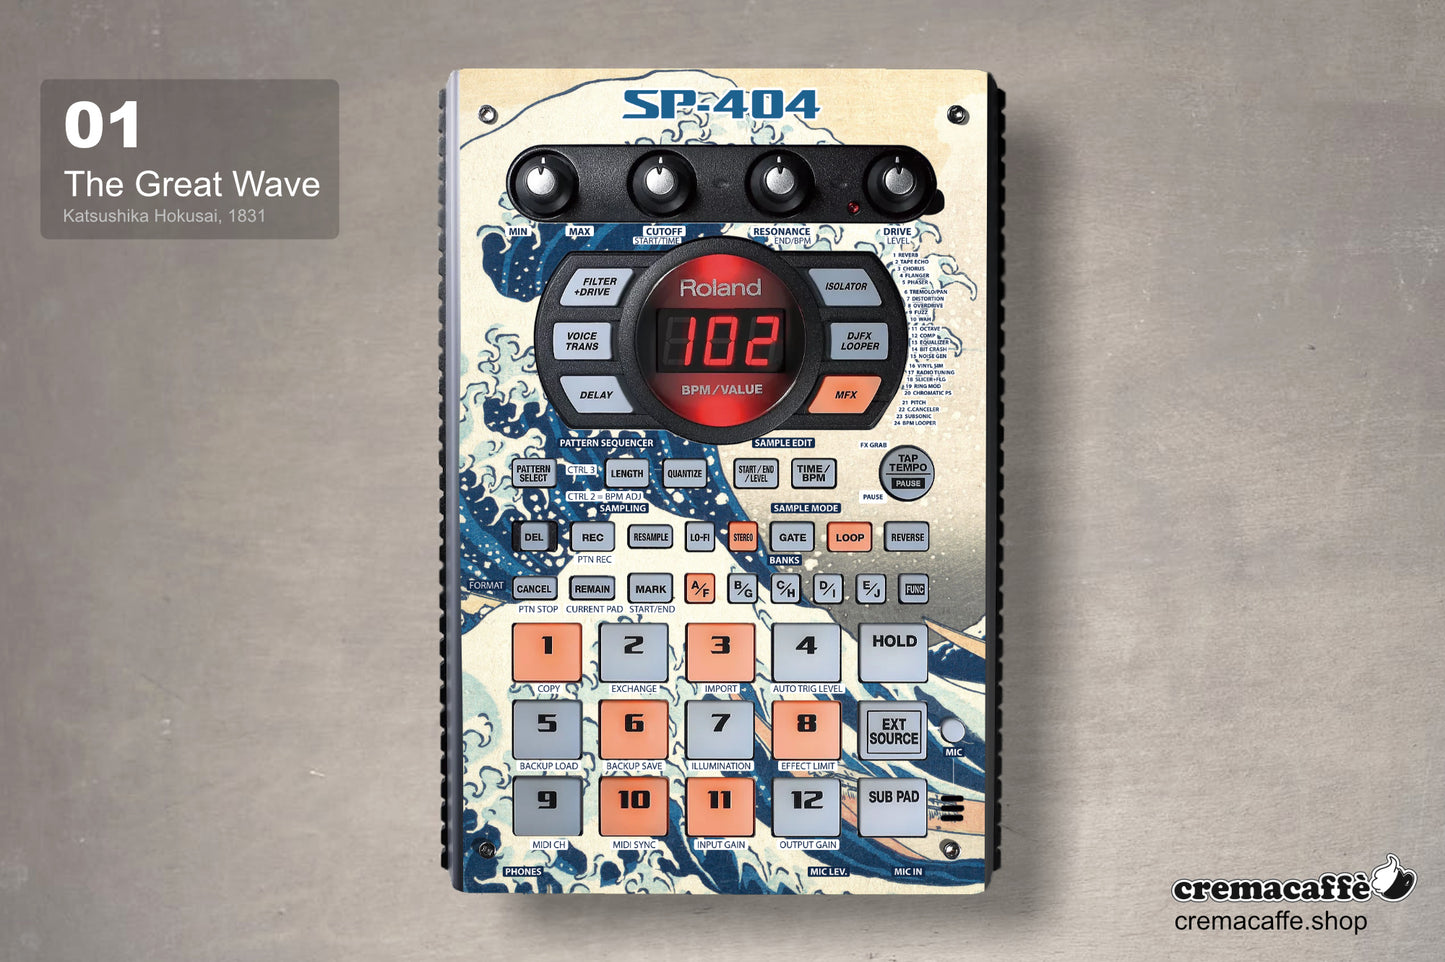 SP-404 SX Skin - The Great Wave | Cremacaffe Design